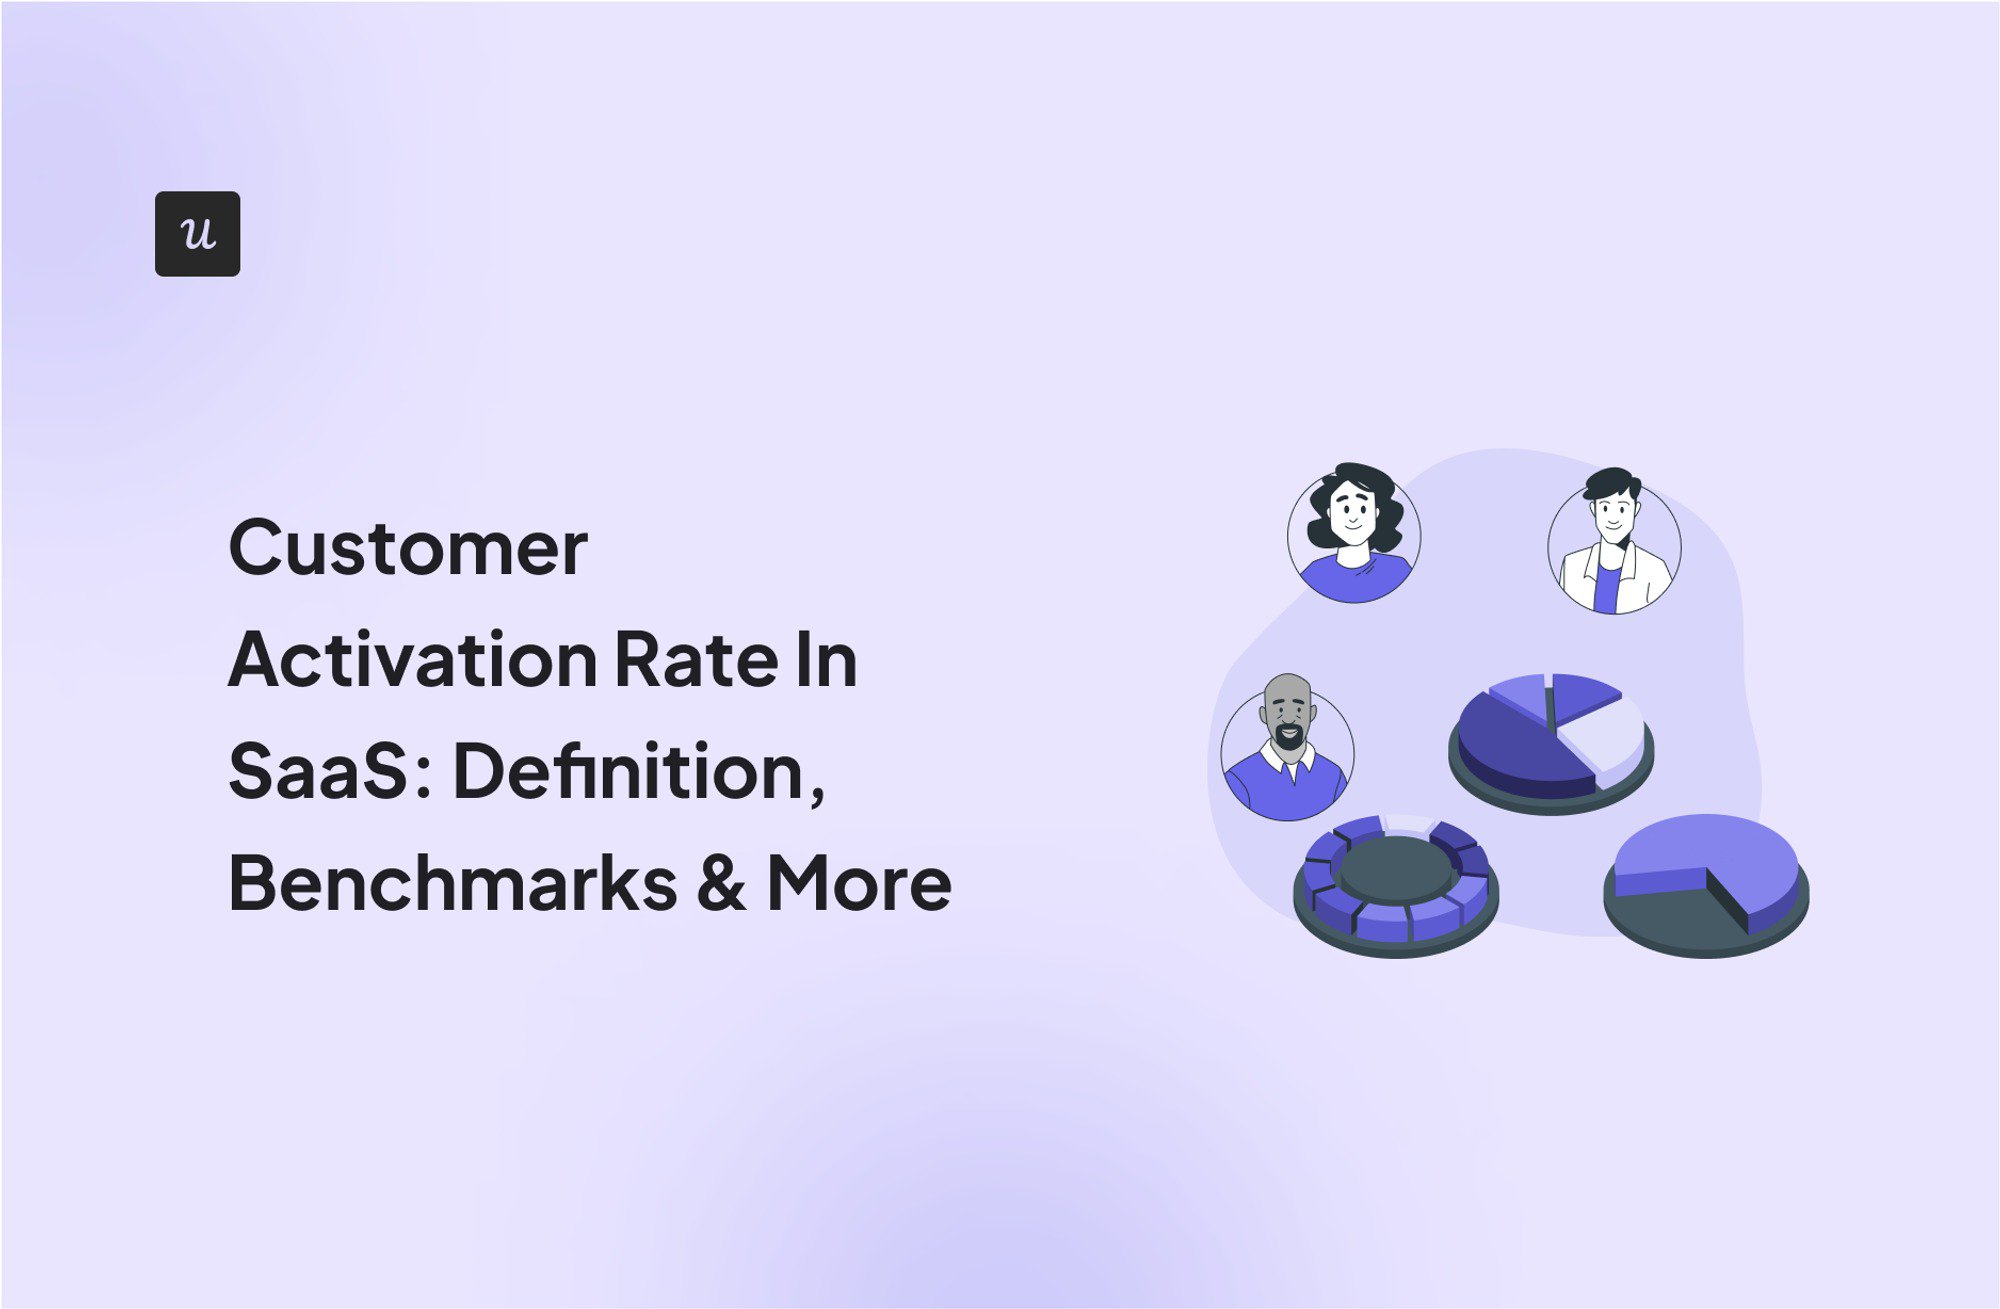 Customer Activation Rate In SaaS: Definition, Benchmarks & More cover